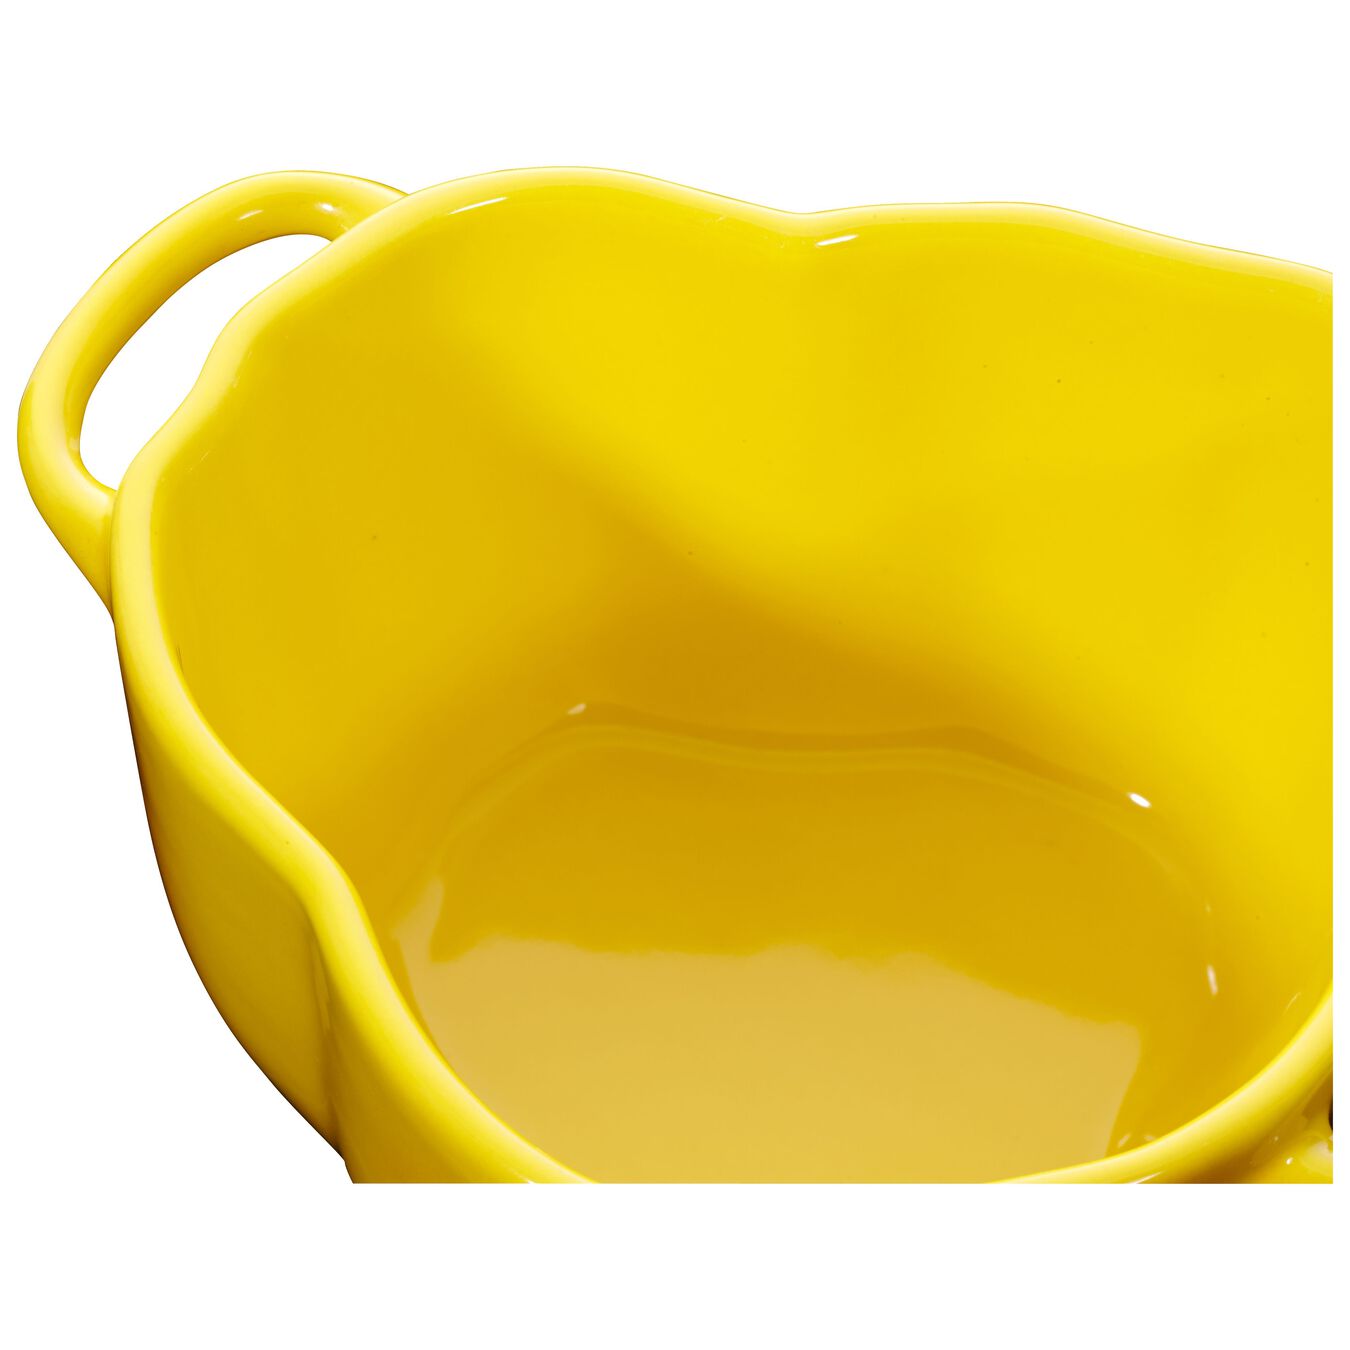 450 ml ceramic pepper Cocotte, yellow,,large 2